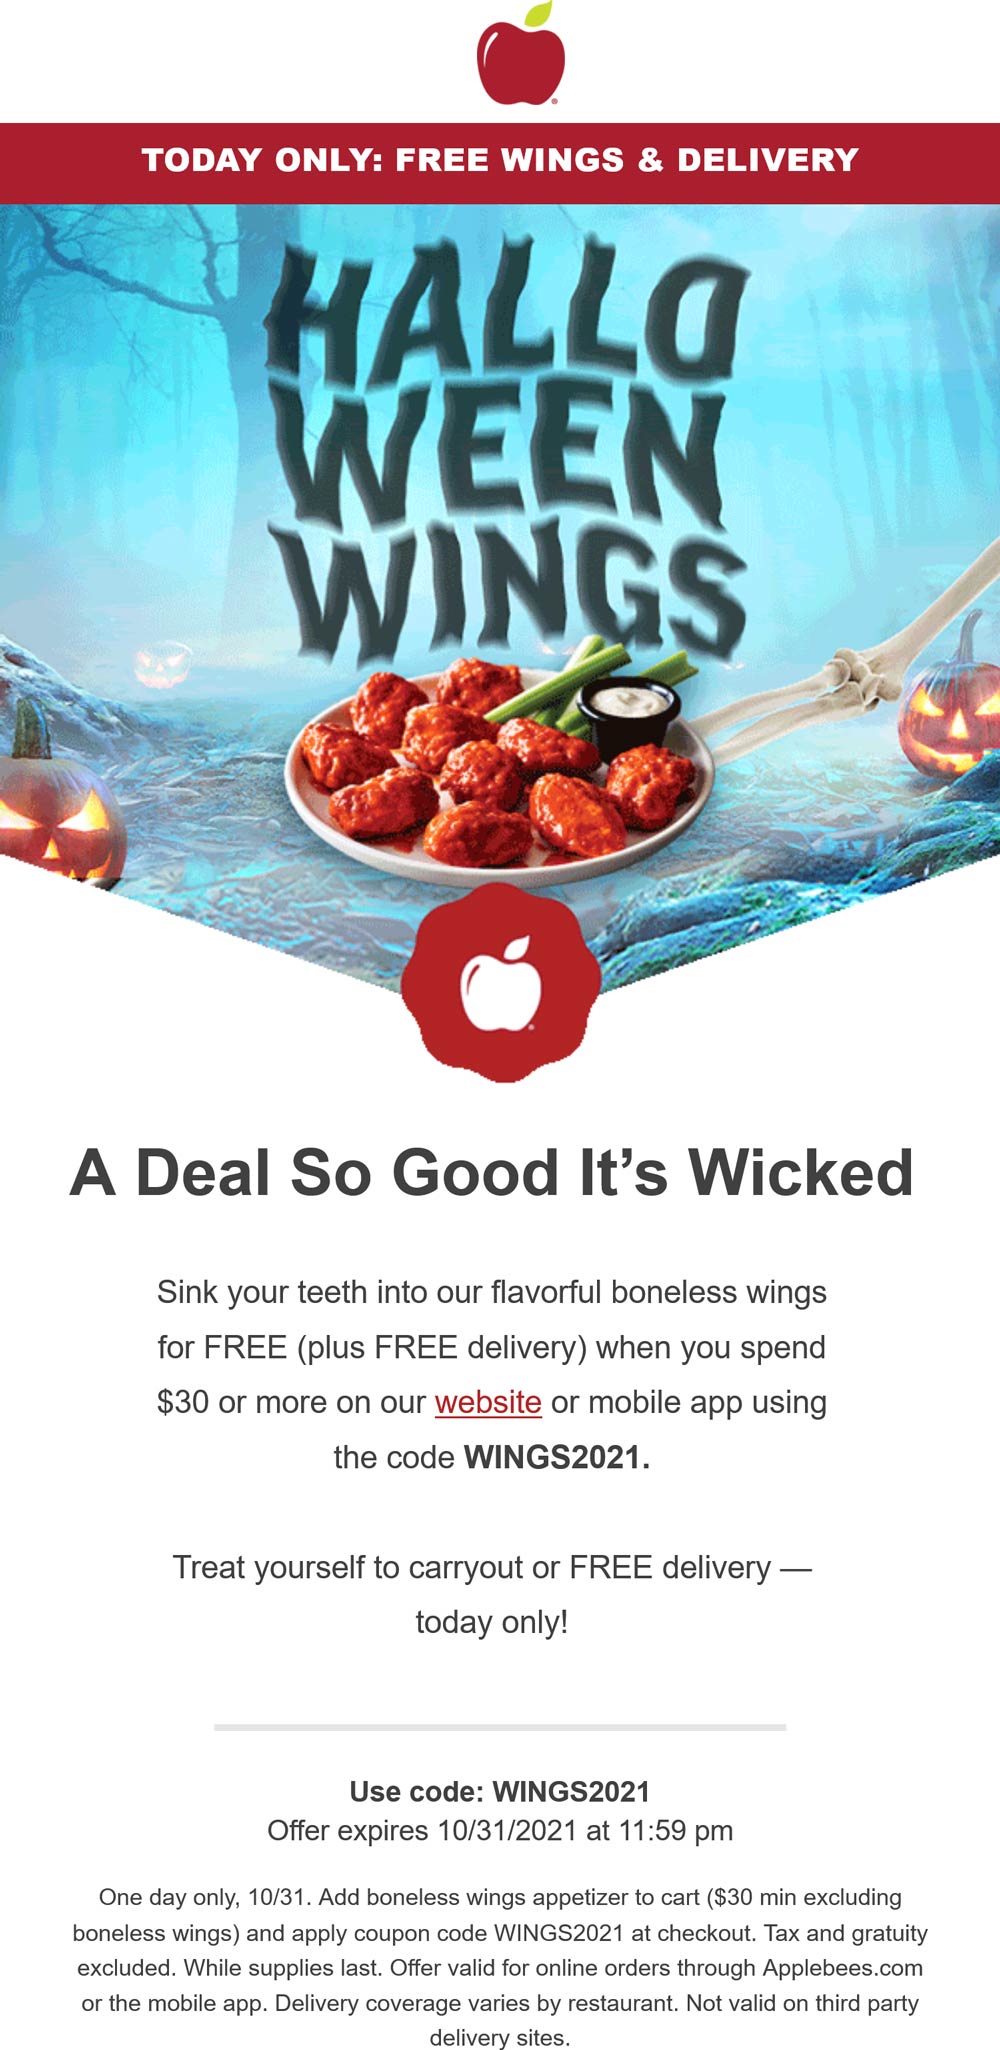 Applebees restaurants Coupon  Free boneless wings appetizer & delivery with $30 today at Applebees via promo code WINGS2021 #applebees 